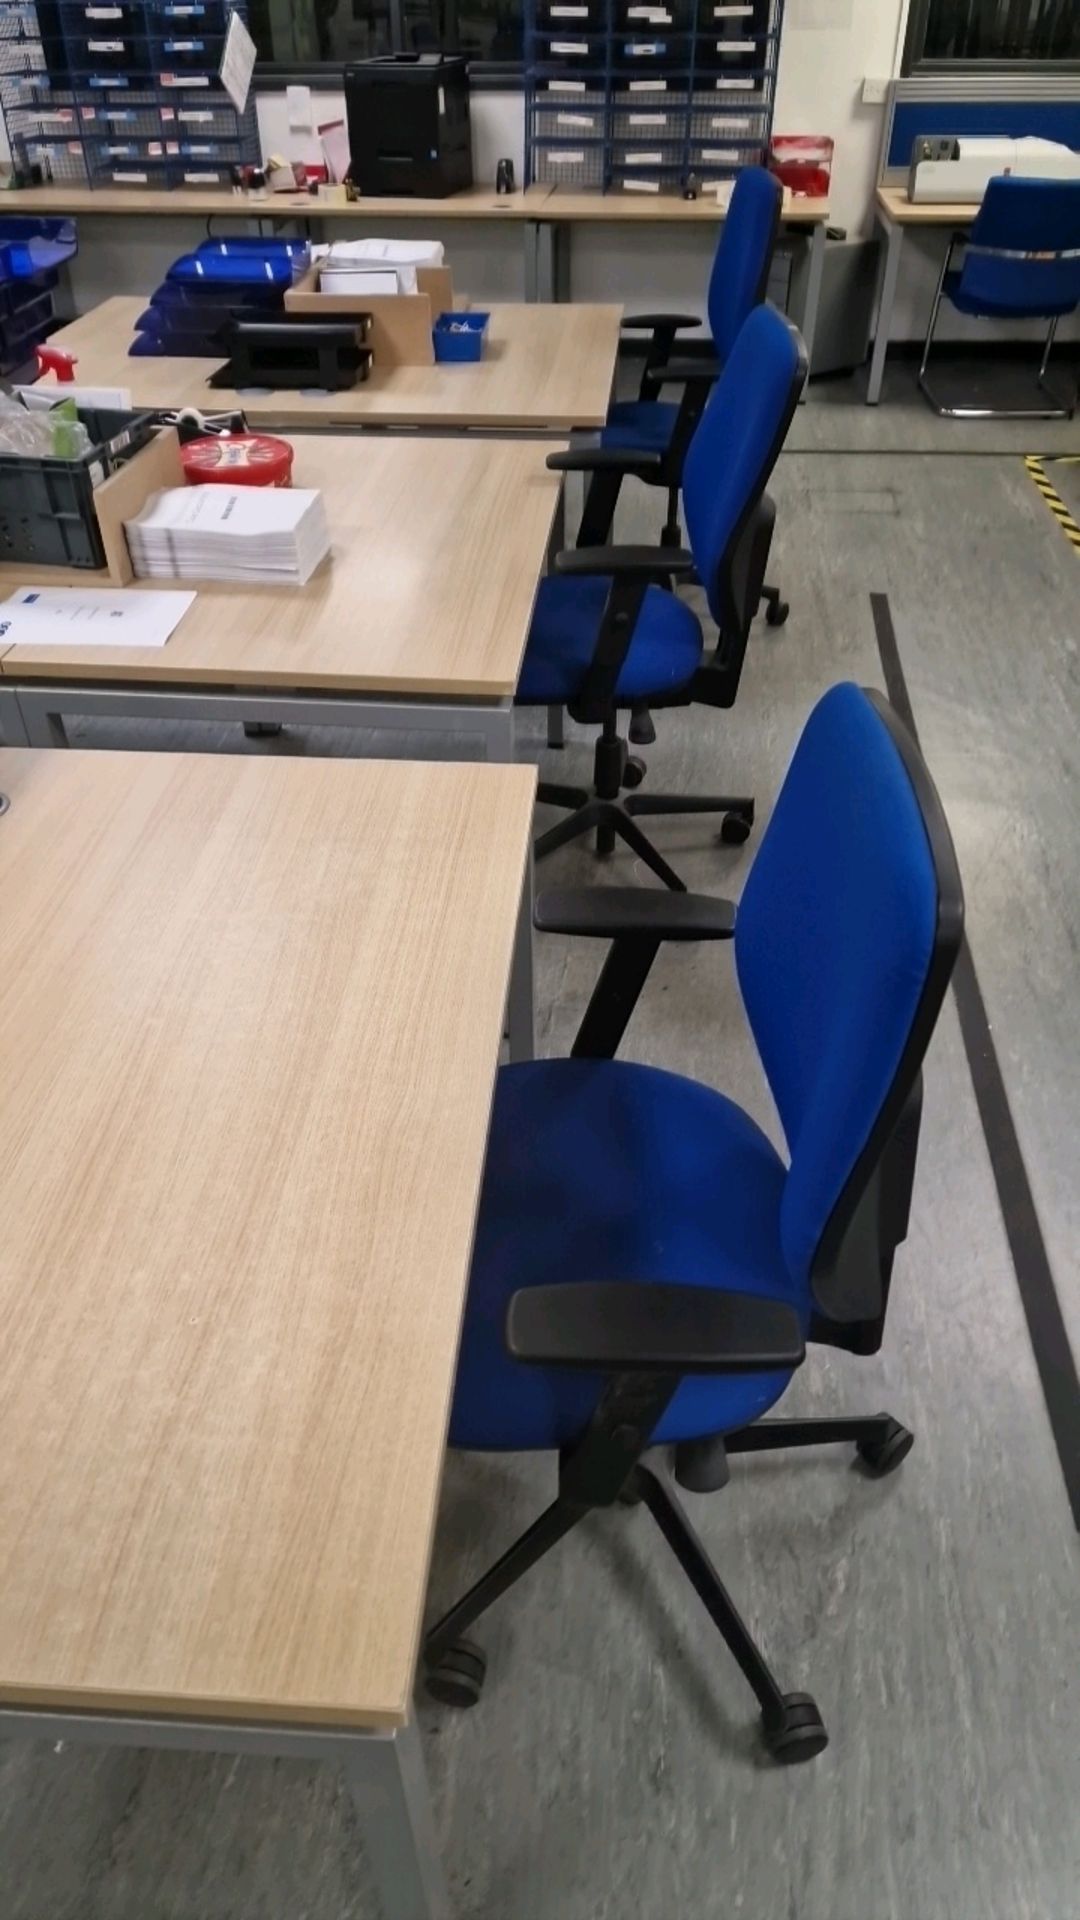 Bank Of 6 Desks & 6 Office Chairs - Image 3 of 4